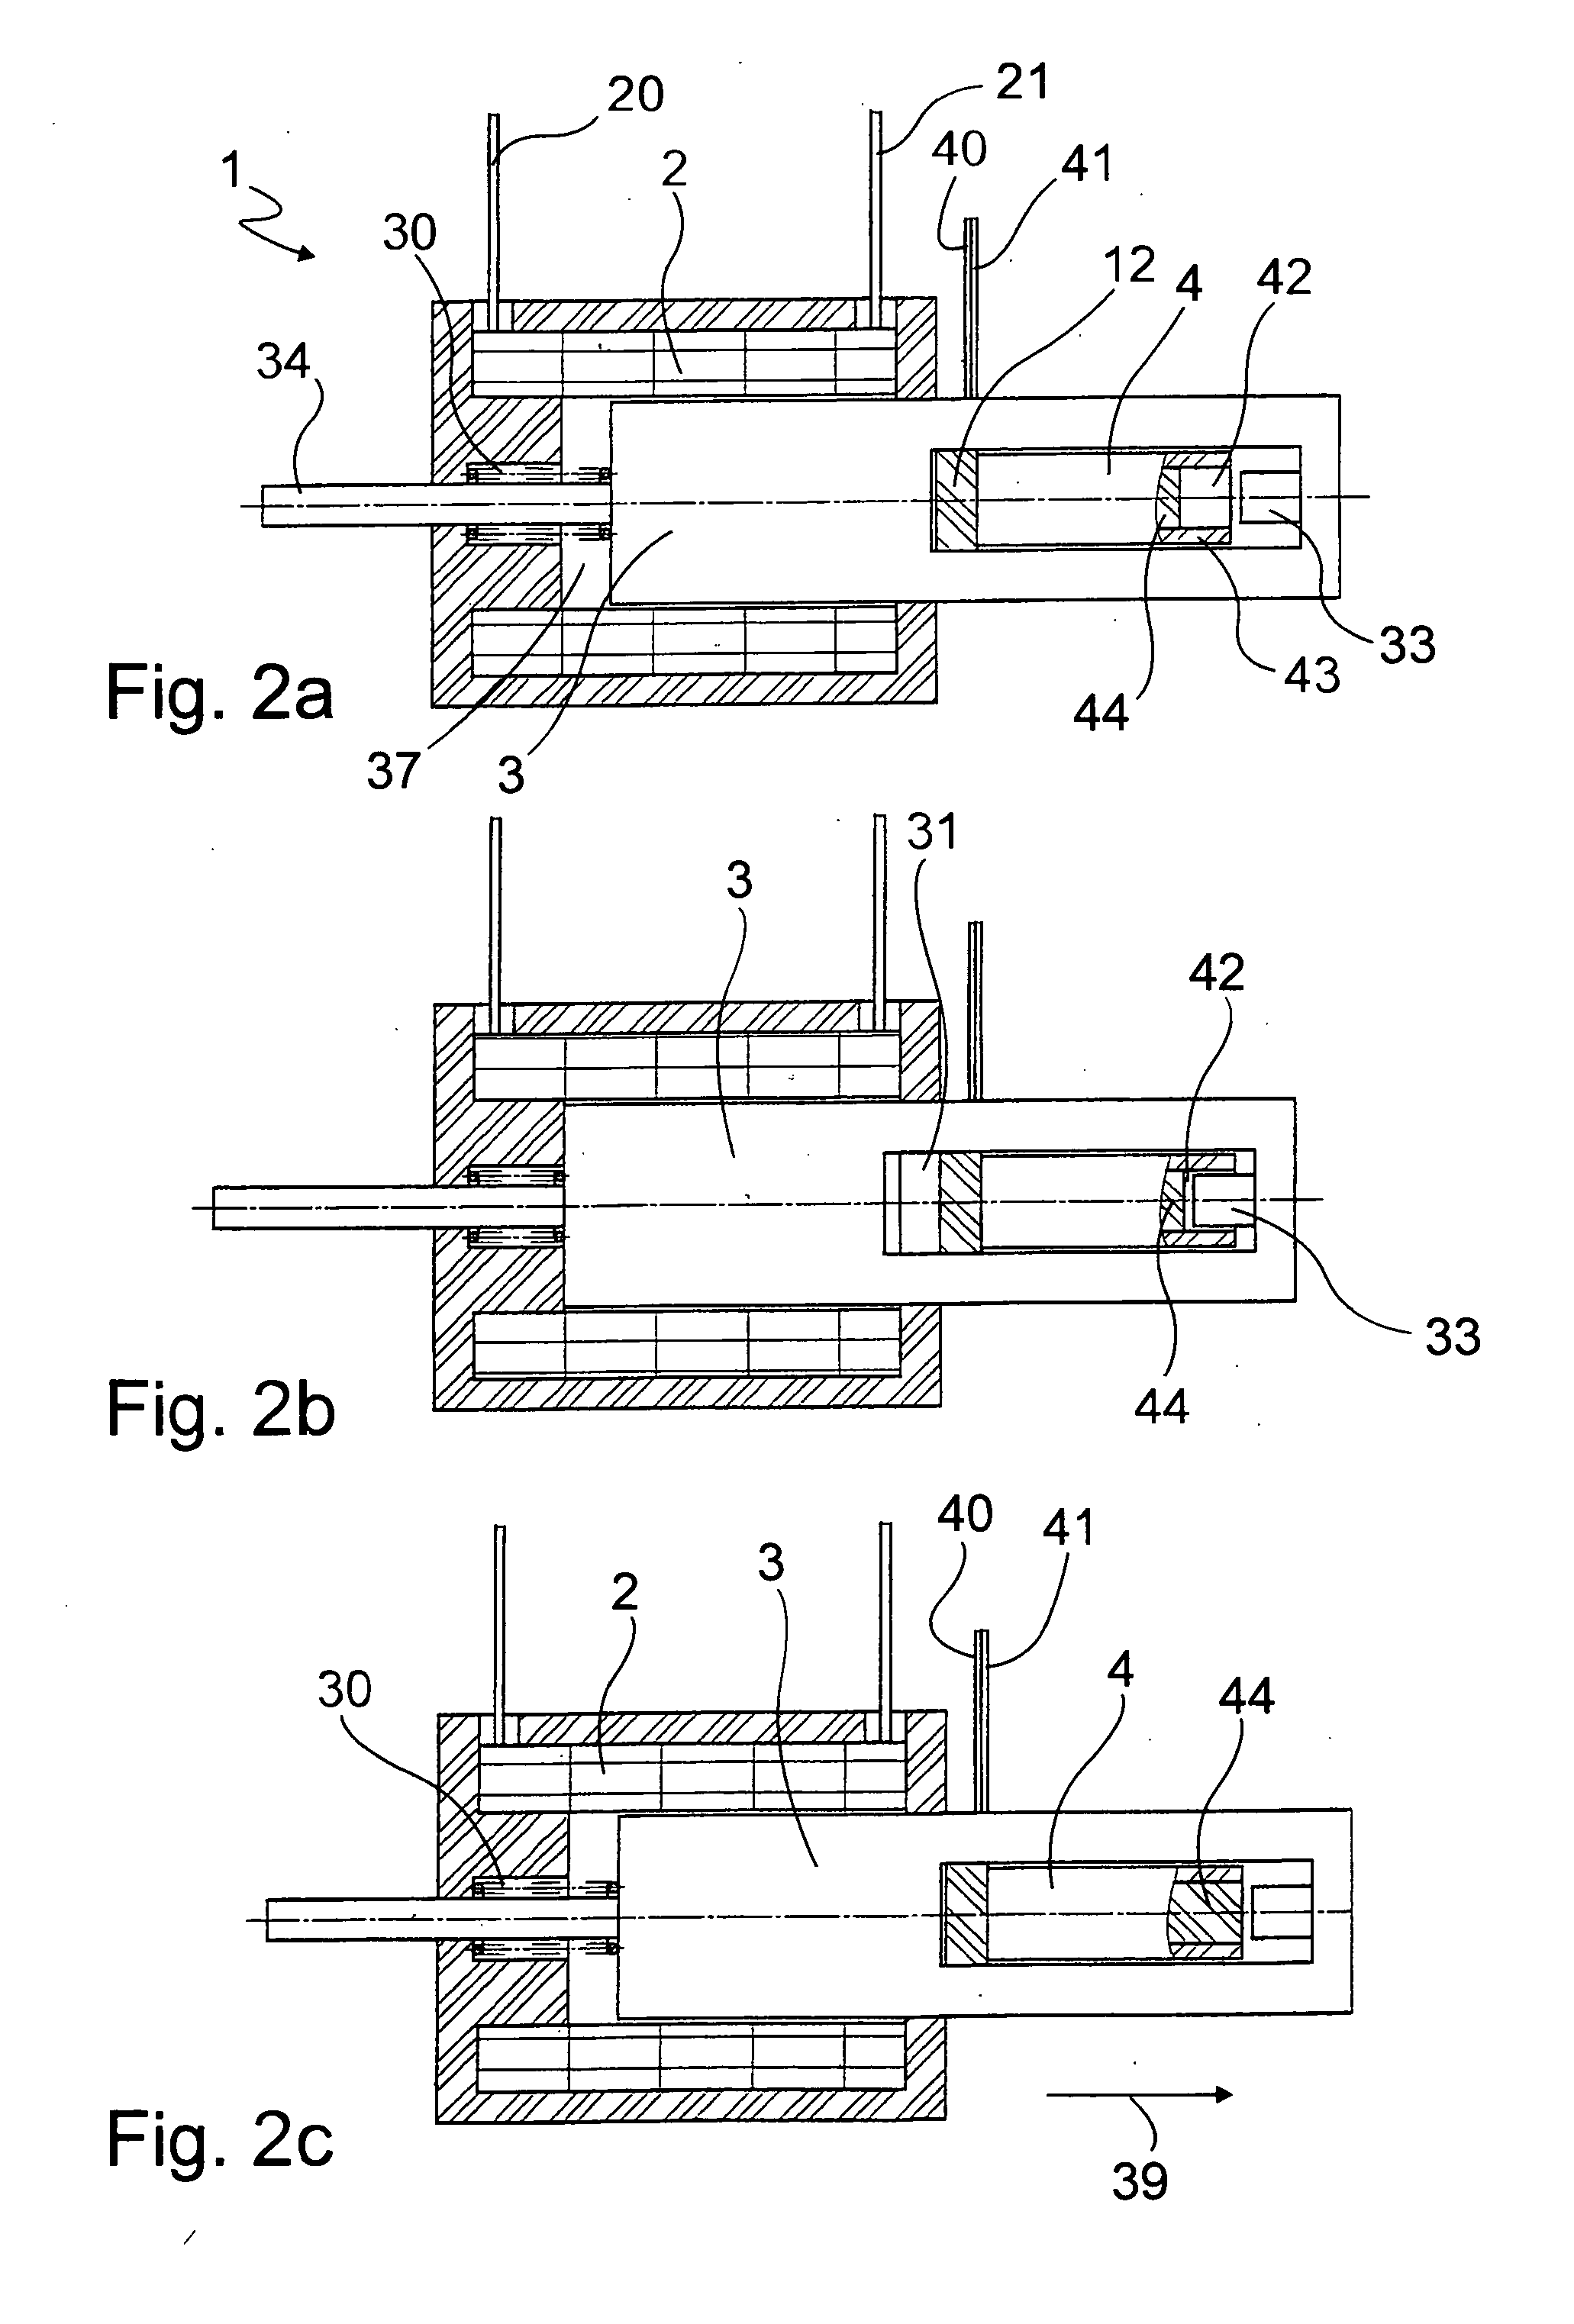 Solenoid and actuating element with solenoid